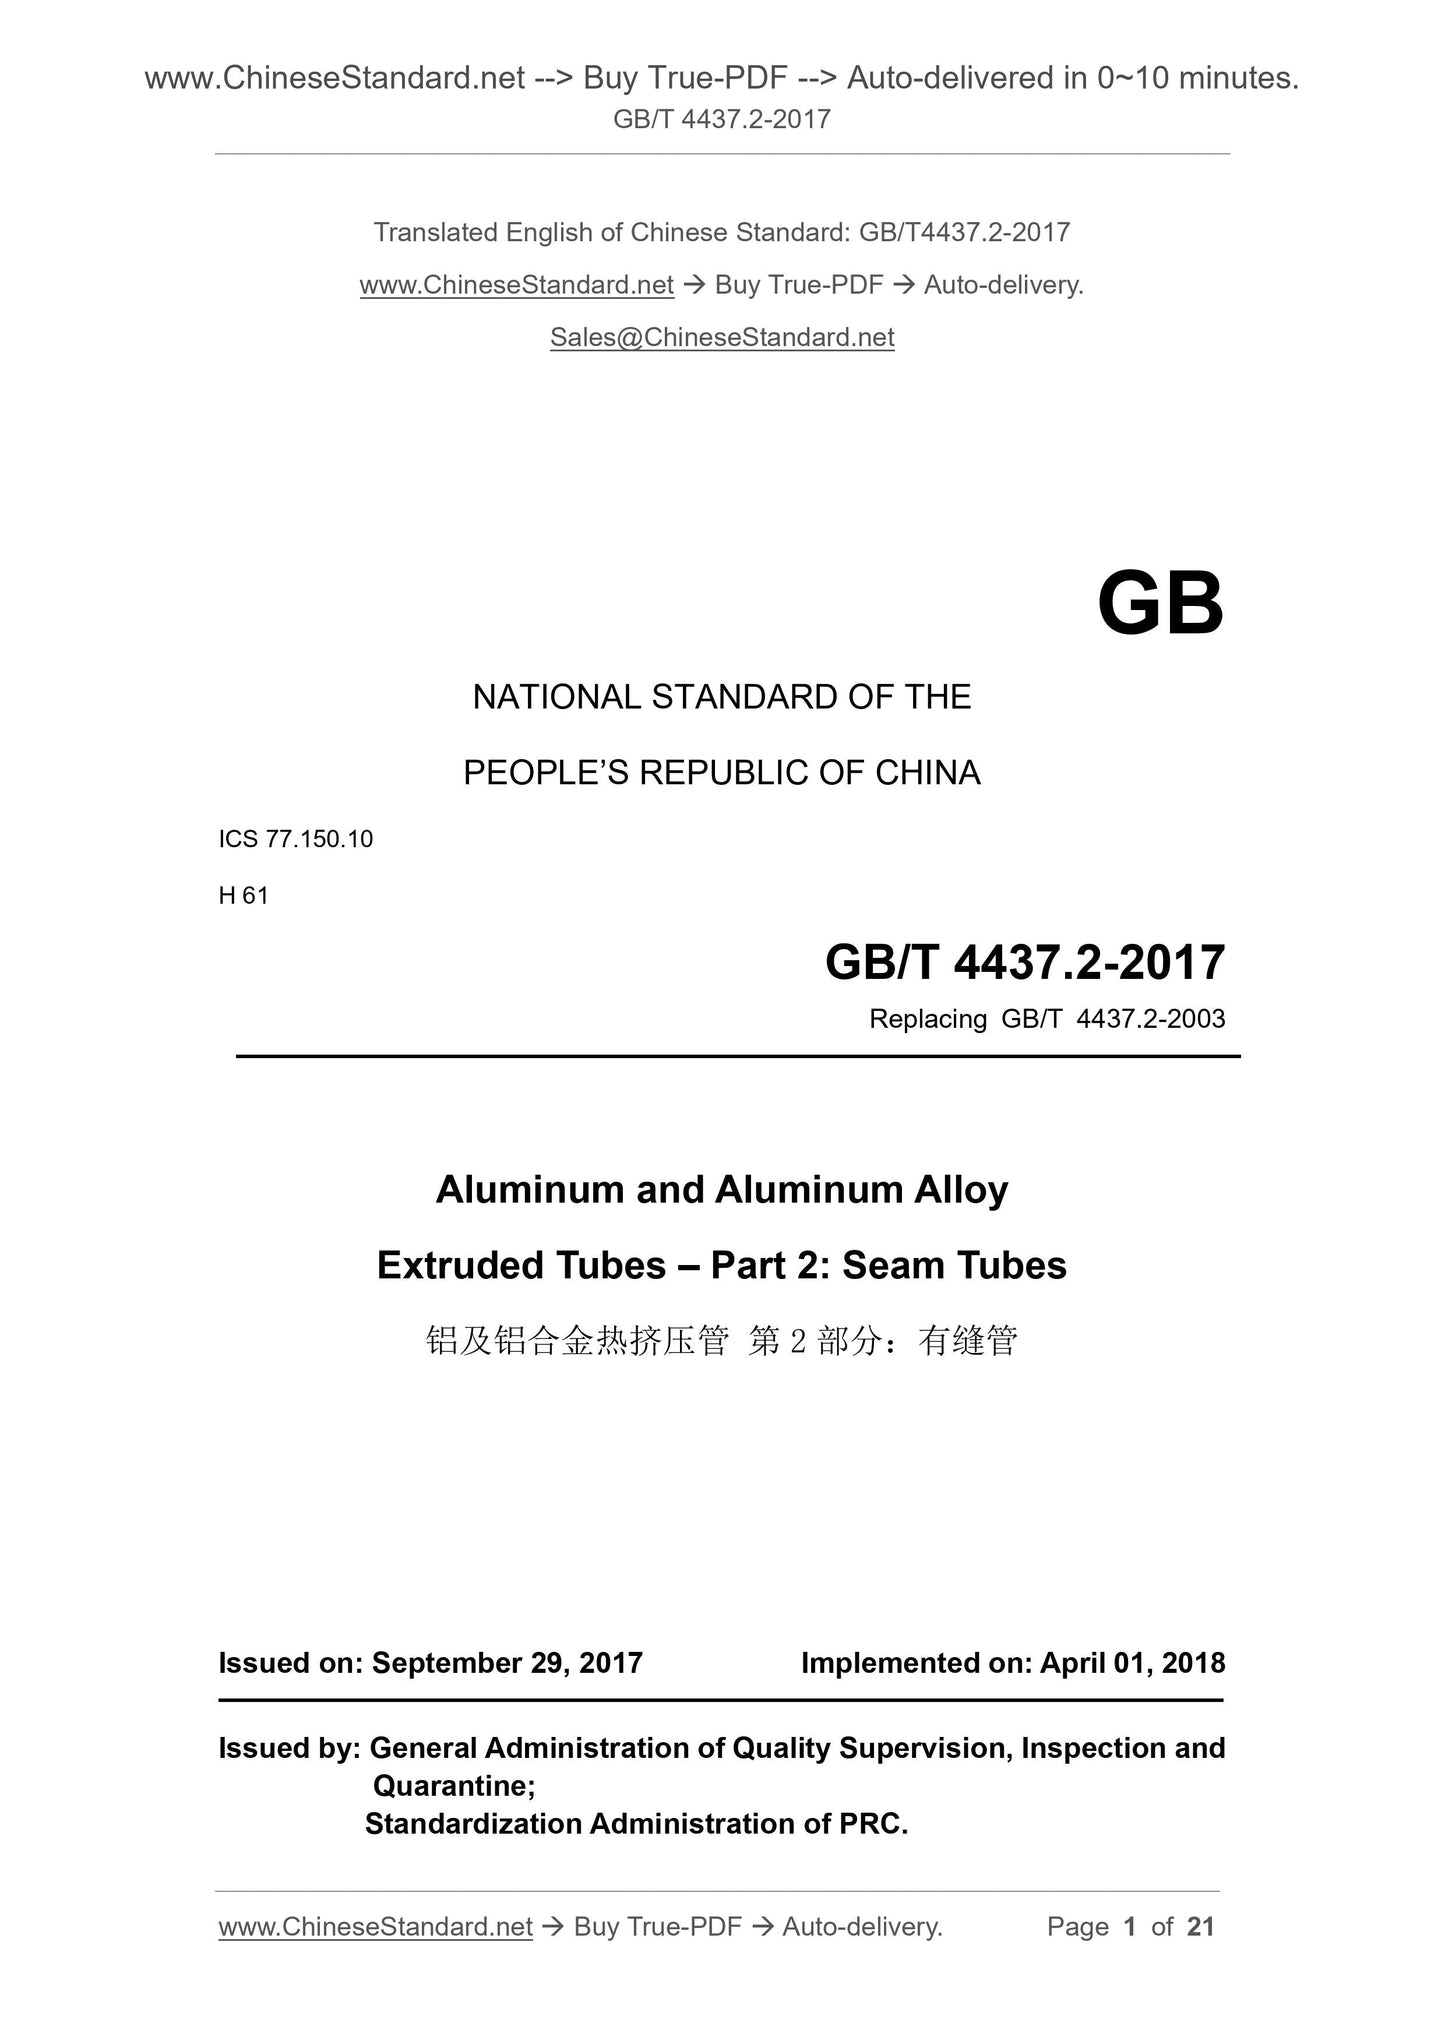 GB/T 4437.2-2017 Page 1